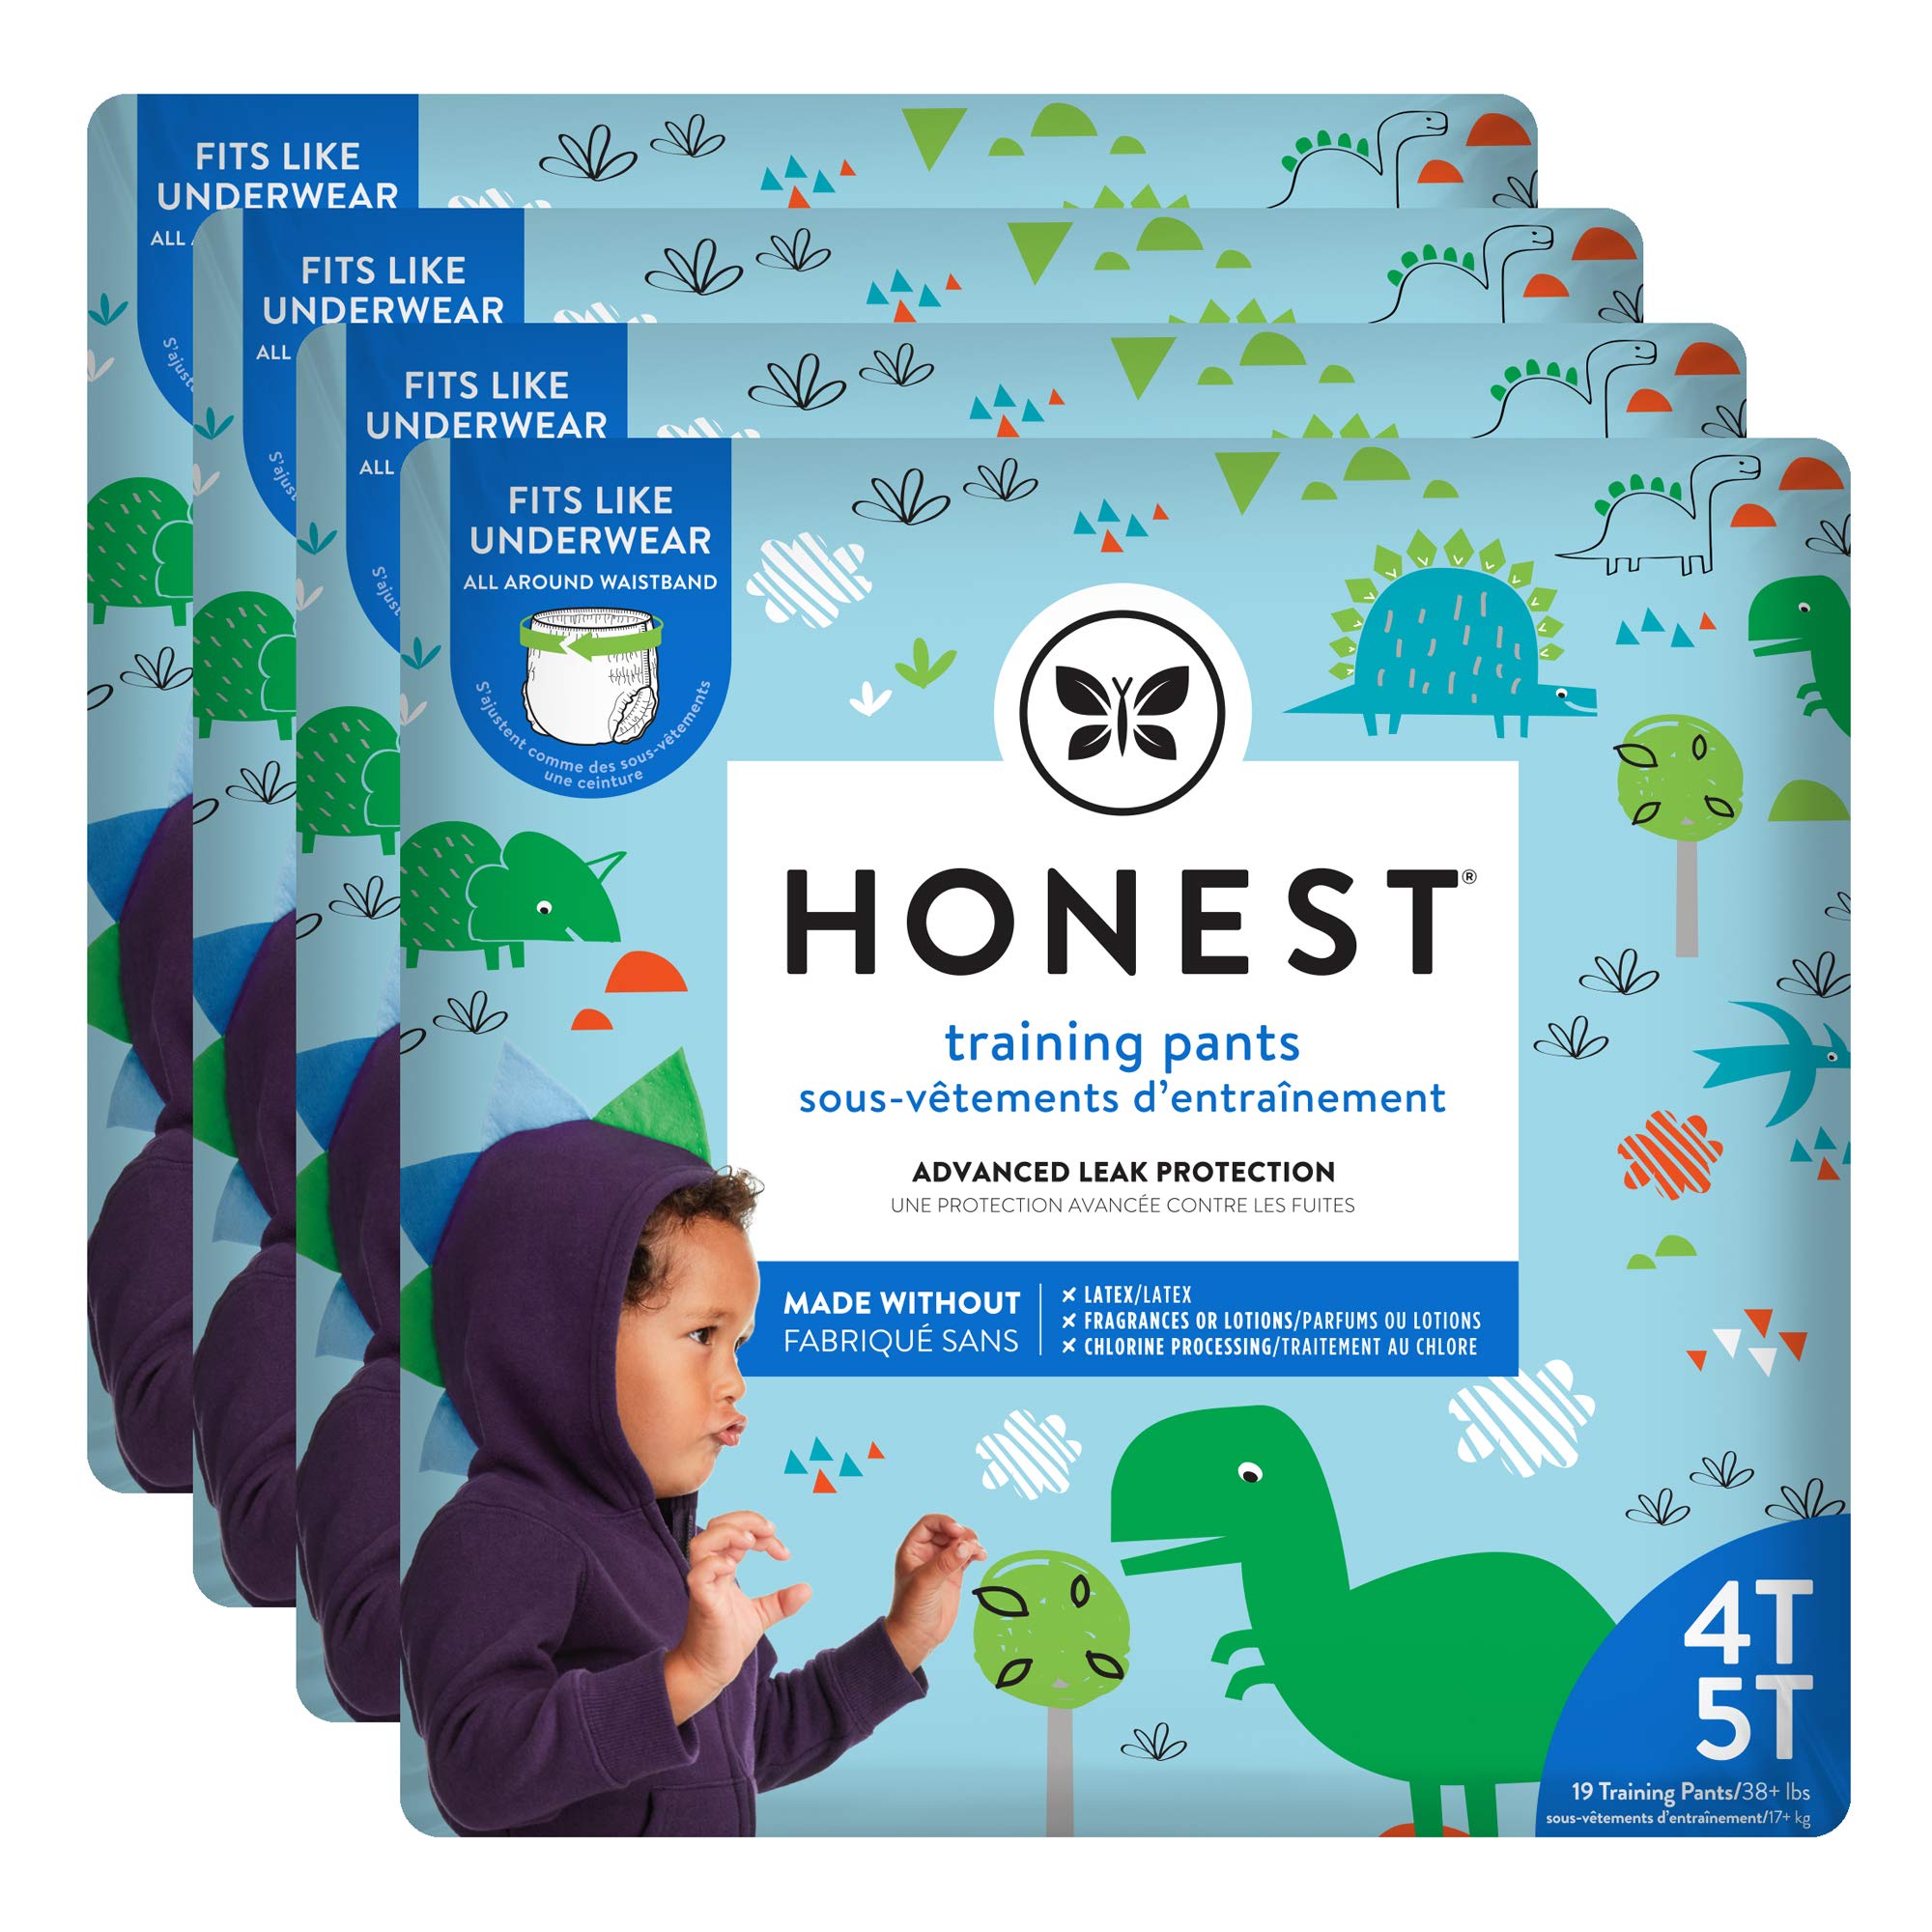 The Honest Company Toddler Training Pants, Dinosaurs, 4T/5T, 76 Count,  Eco-Friendly, Underwear-Like Fit, Stretchy Waistband & Tearaway Sides,  Perfect for Potty Training 4T-5T (76 Count) Dinosaurs